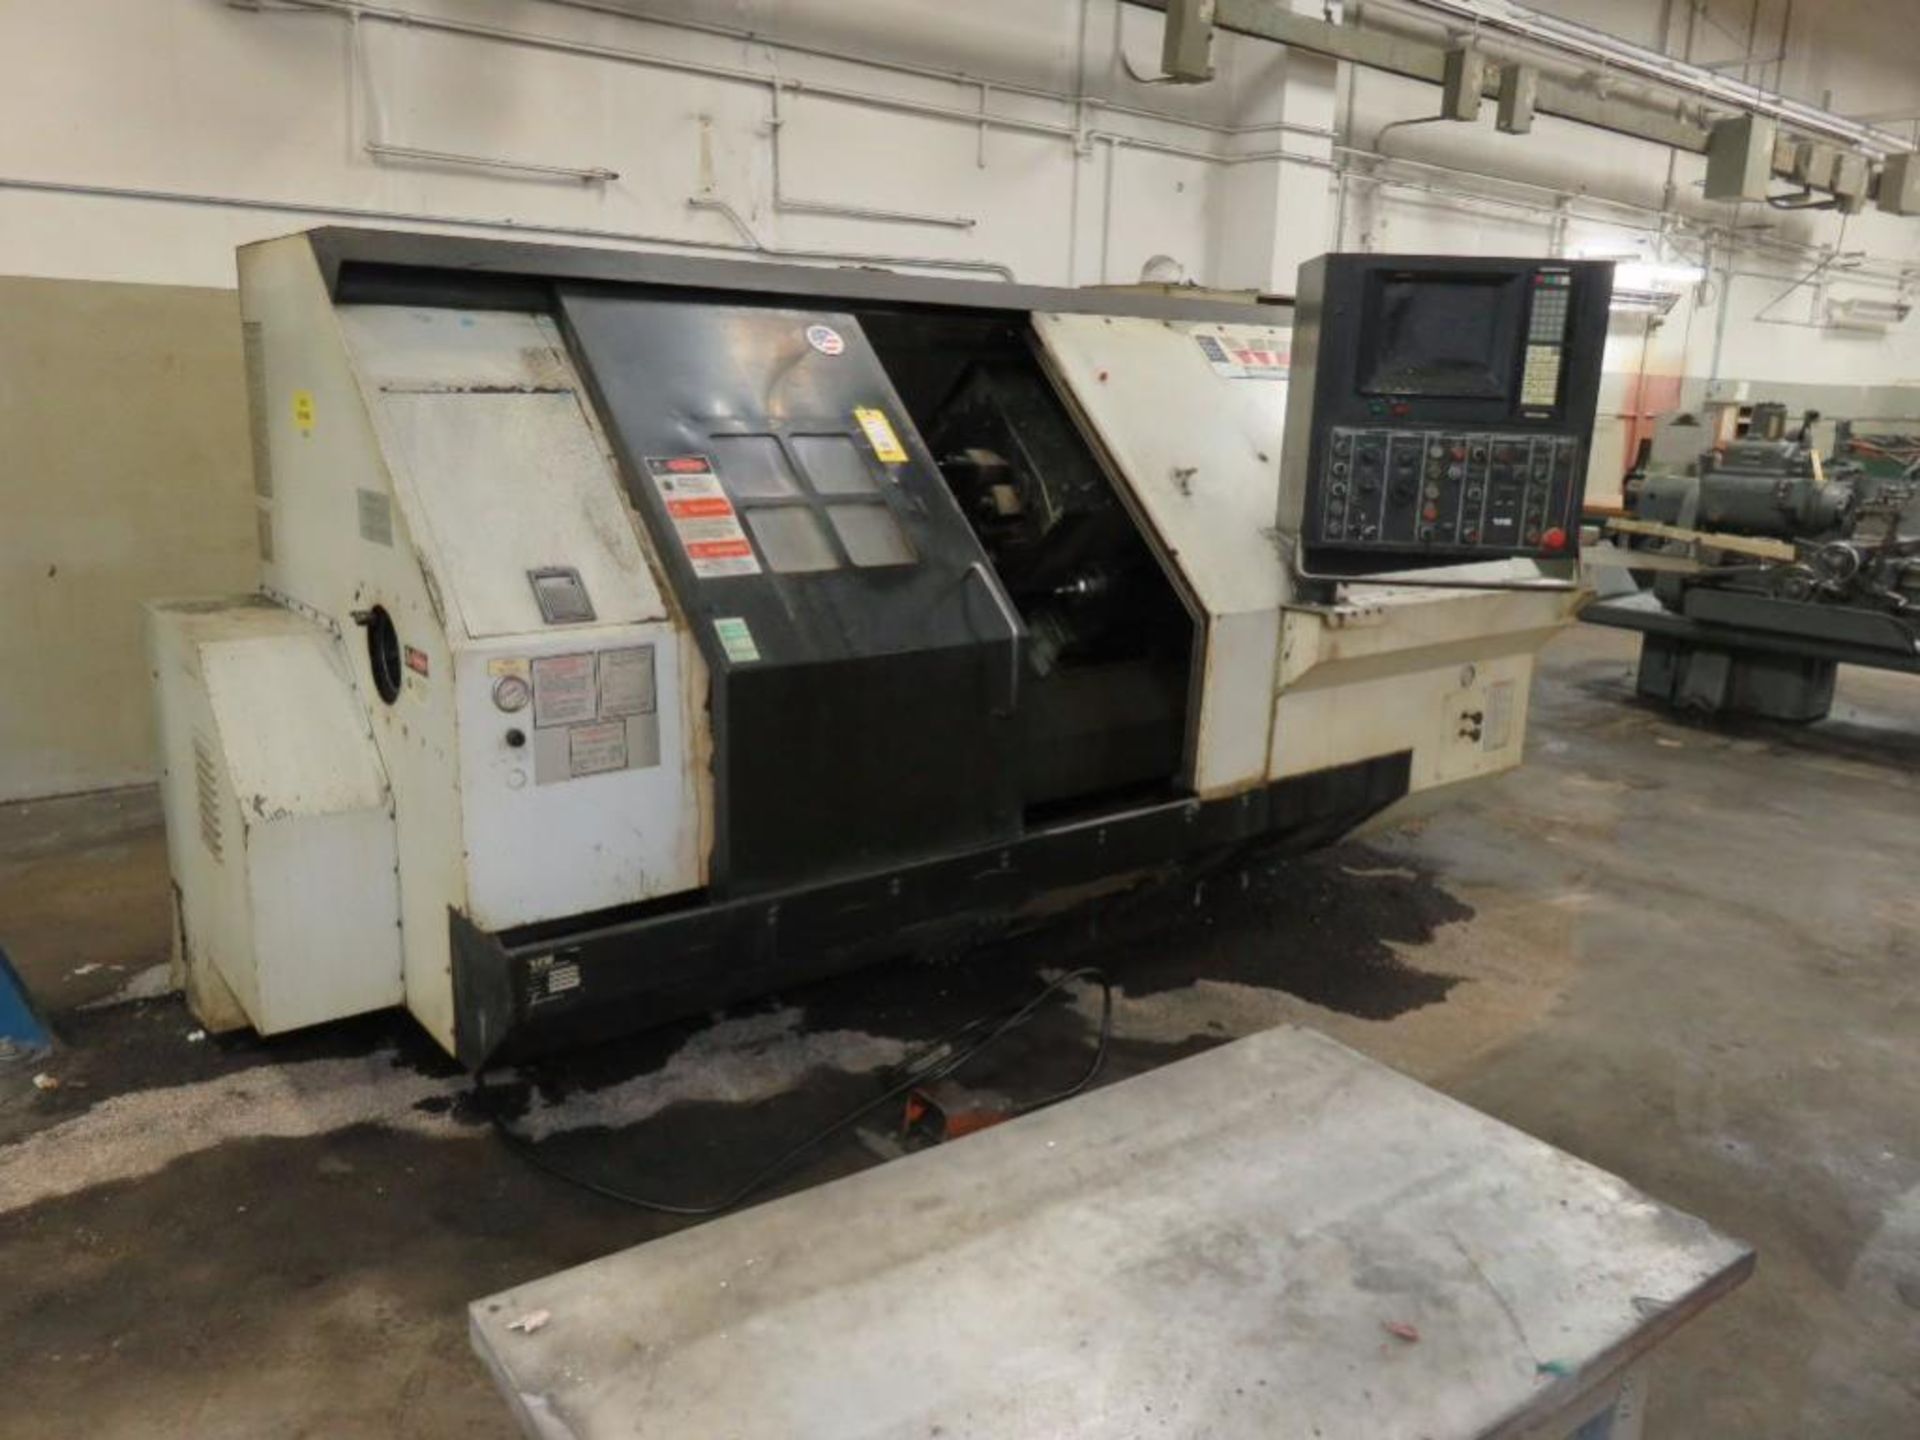 Warner & Swasey CNC 2-Axis Turret Lathe Model Universal S Titan, S/N 3312061, 10 Position Turret, 12